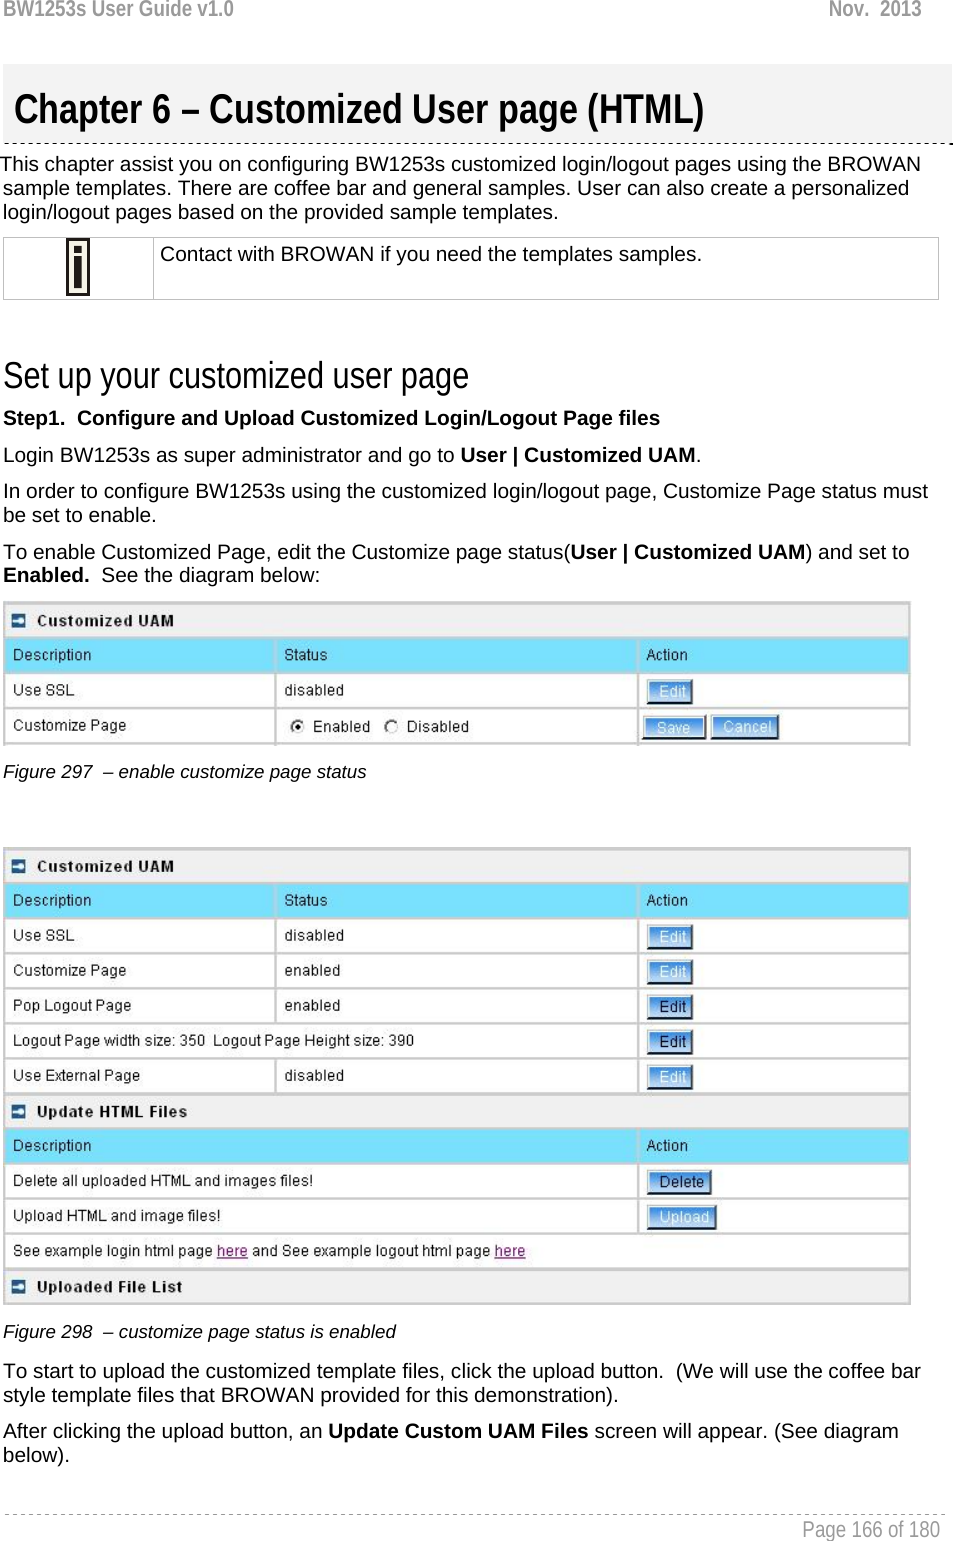 BW1253s User Guide v1.0  Nov.  2013     Page 166 of 180   This chapter assist you on configuring BW1253s customized login/logout pages using the BROWAN sample templates. There are coffee bar and general samples. User can also create a personalized login/logout pages based on the provided sample templates.  Contact with BROWAN if you need the templates samples.  Set up your customized user page Step1.  Configure and Upload Customized Login/Logout Page files Login BW1253s as super administrator and go to User | Customized UAM.   In order to configure BW1253s using the customized login/logout page, Customize Page status must be set to enable. To enable Customized Page, edit the Customize page status(User | Customized UAM) and set to Enabled.  See the diagram below:  Figure 297  – enable customize page status     Figure 298  – customize page status is enabled  To start to upload the customized template files, click the upload button.  (We will use the coffee bar style template files that BROWAN provided for this demonstration). After clicking the upload button, an Update Custom UAM Files screen will appear. (See diagram below).   Chapter 6 – Customized User page (HTML) 